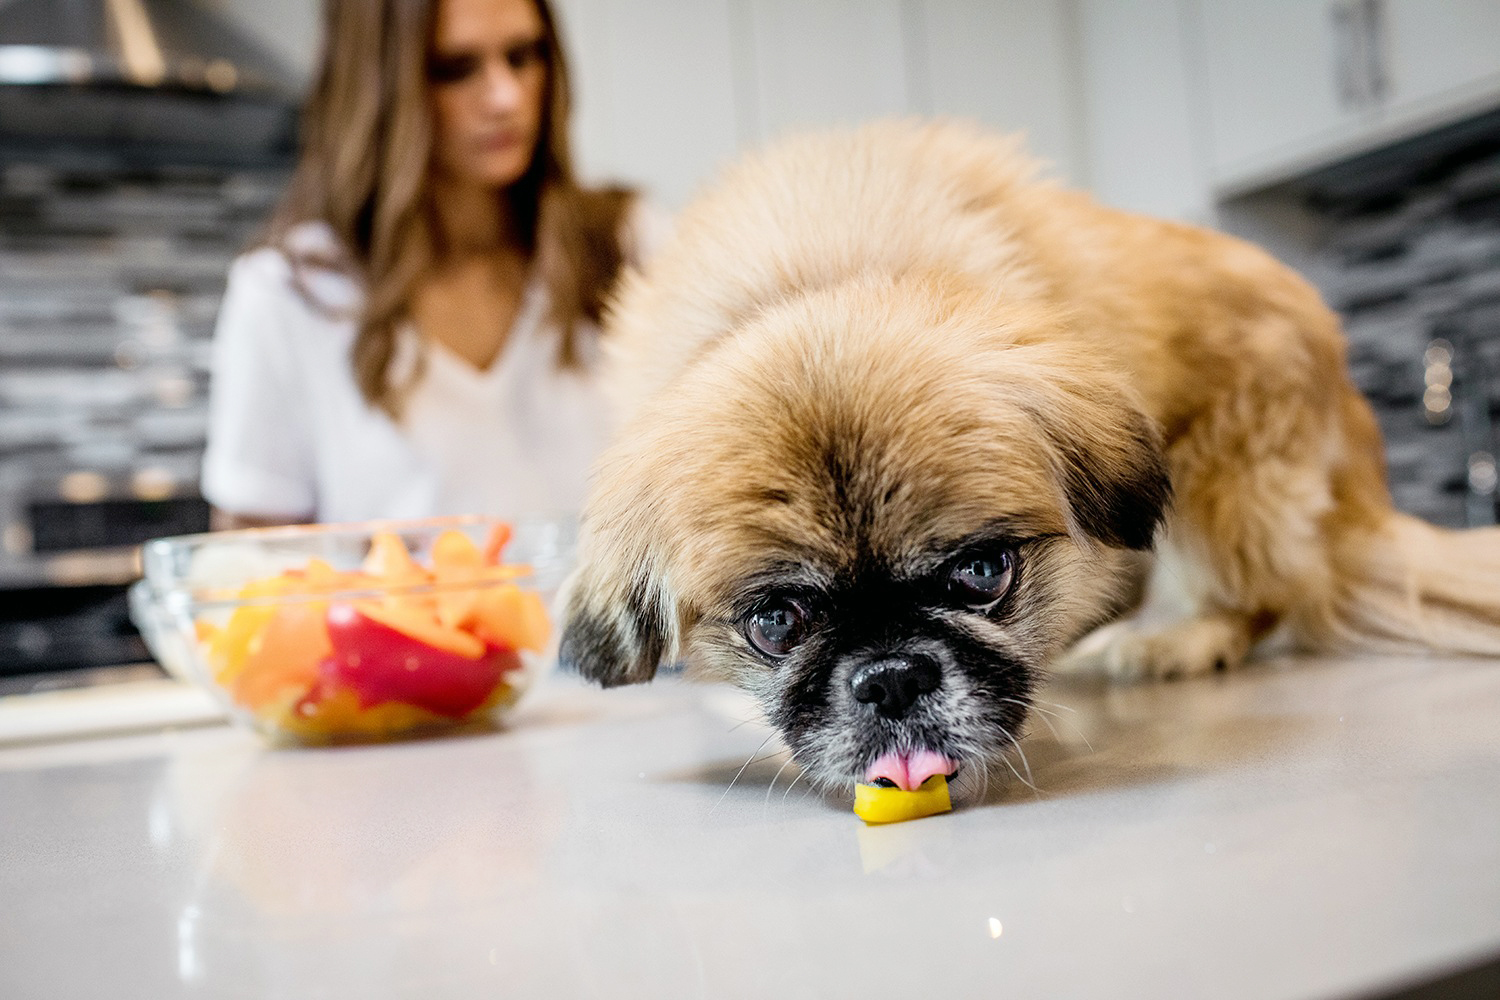 A dog eats a piece of food during an Andersonville engagement session in Chicago.